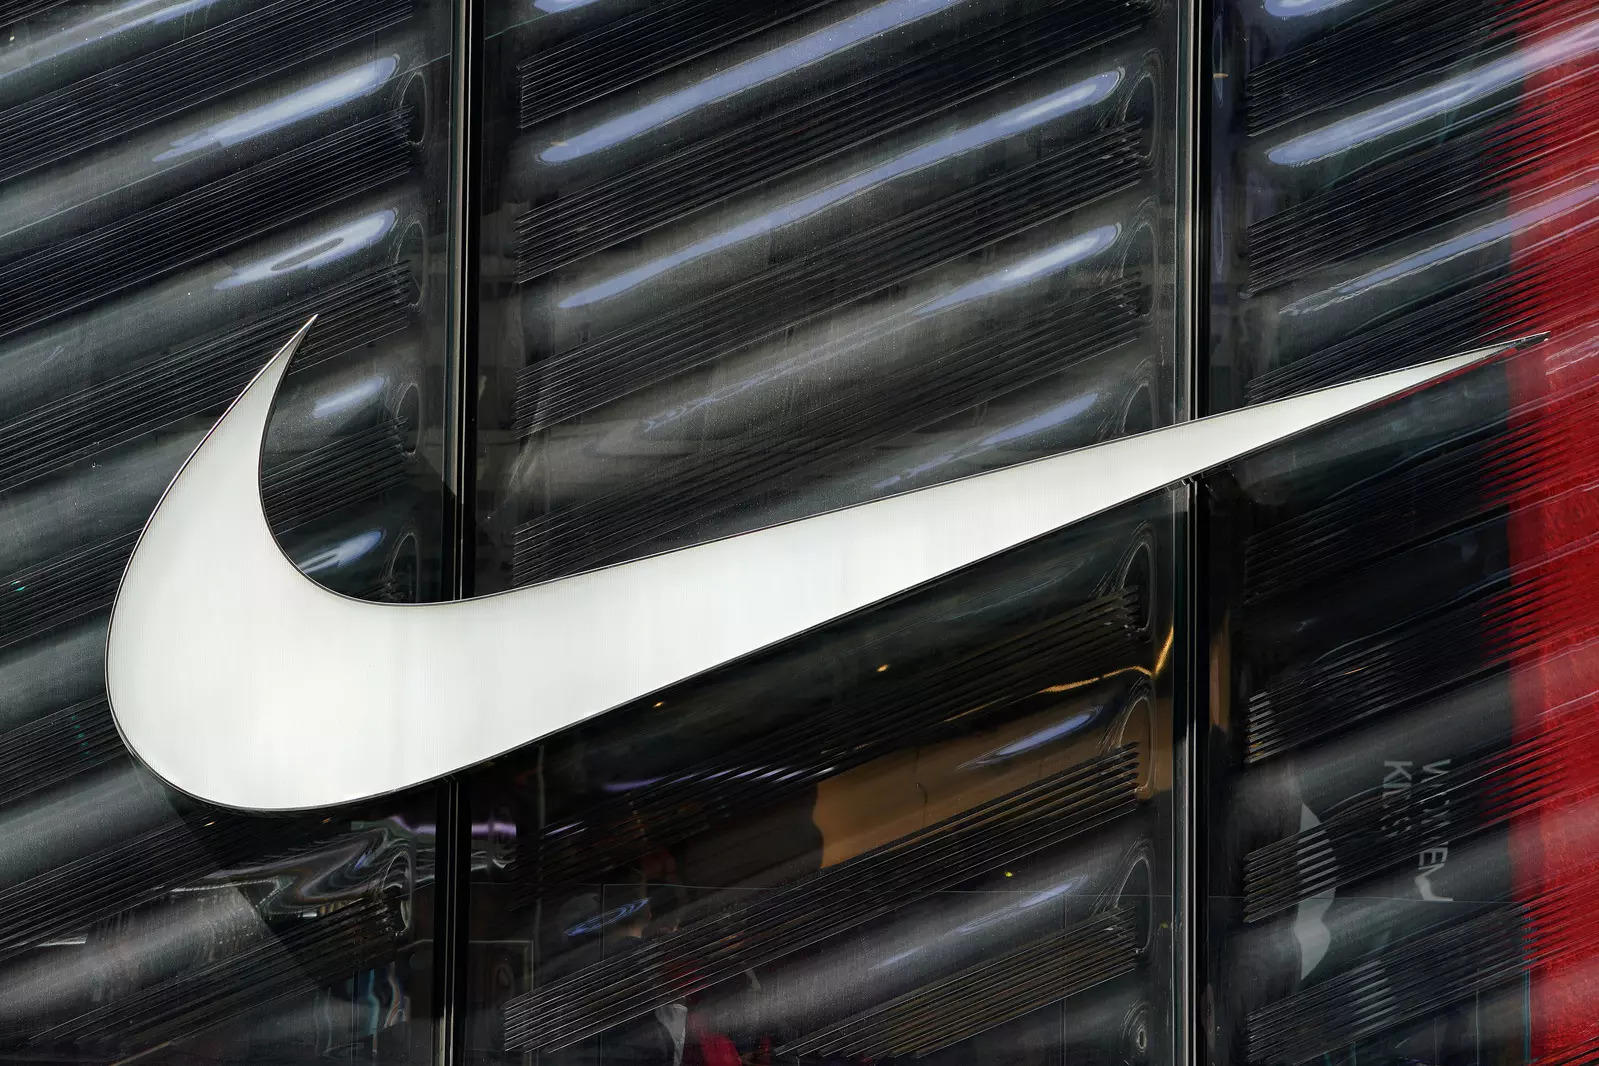 Nike faces social media storm in China over Xinjiang statement, Retail News, ET Retail